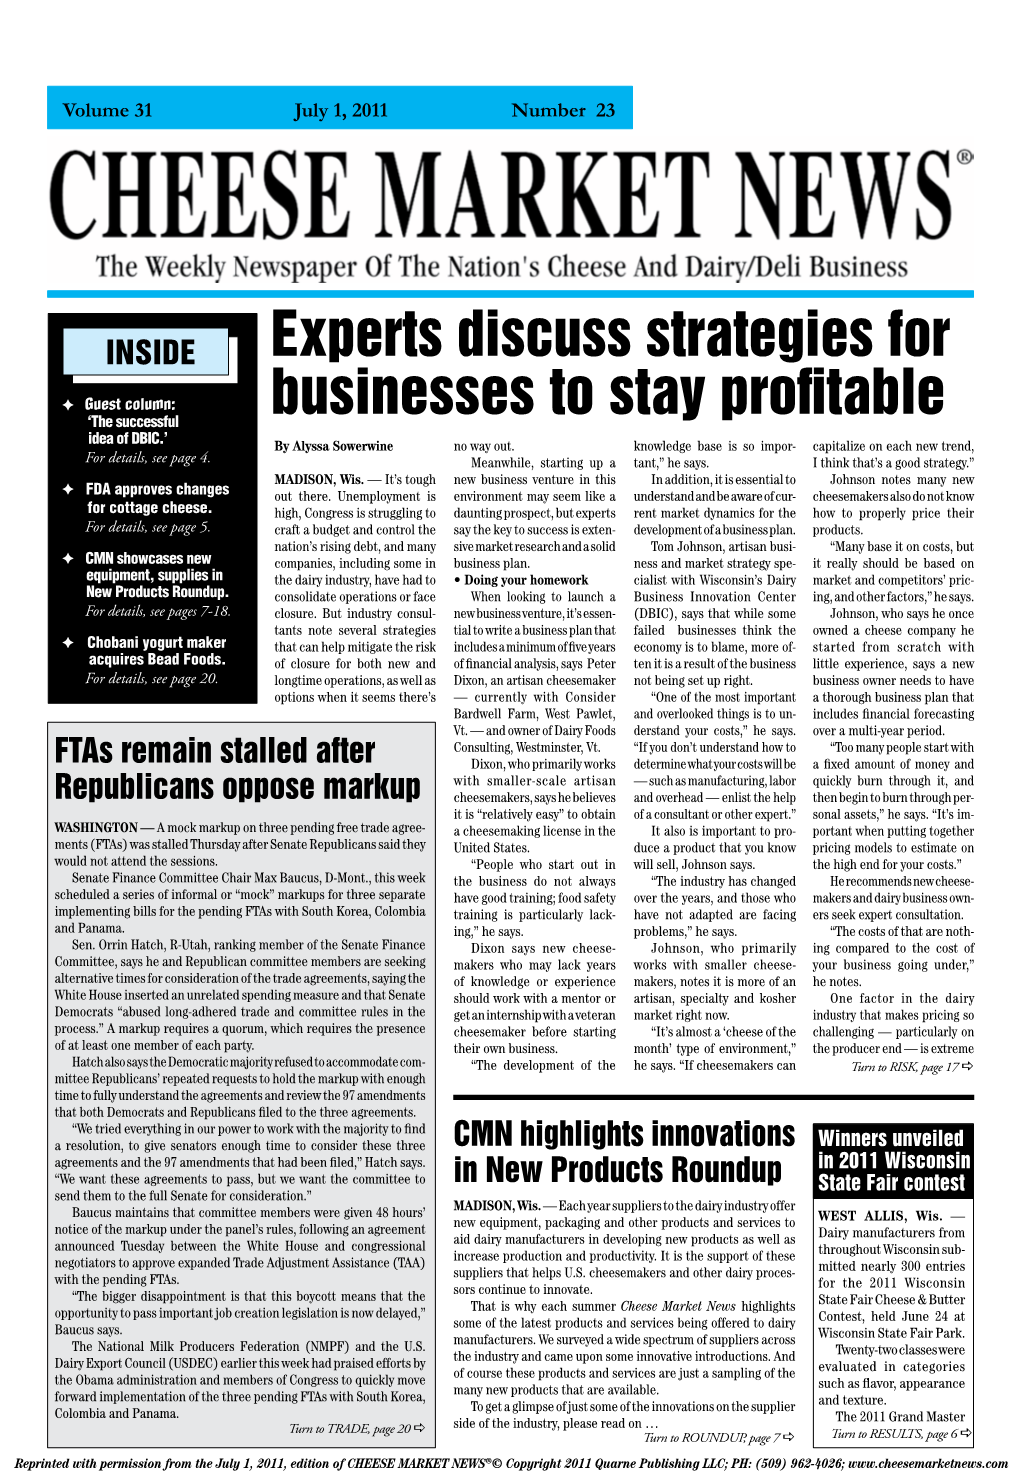 Experts Discuss Strategies for Businesses to Stay Profitable